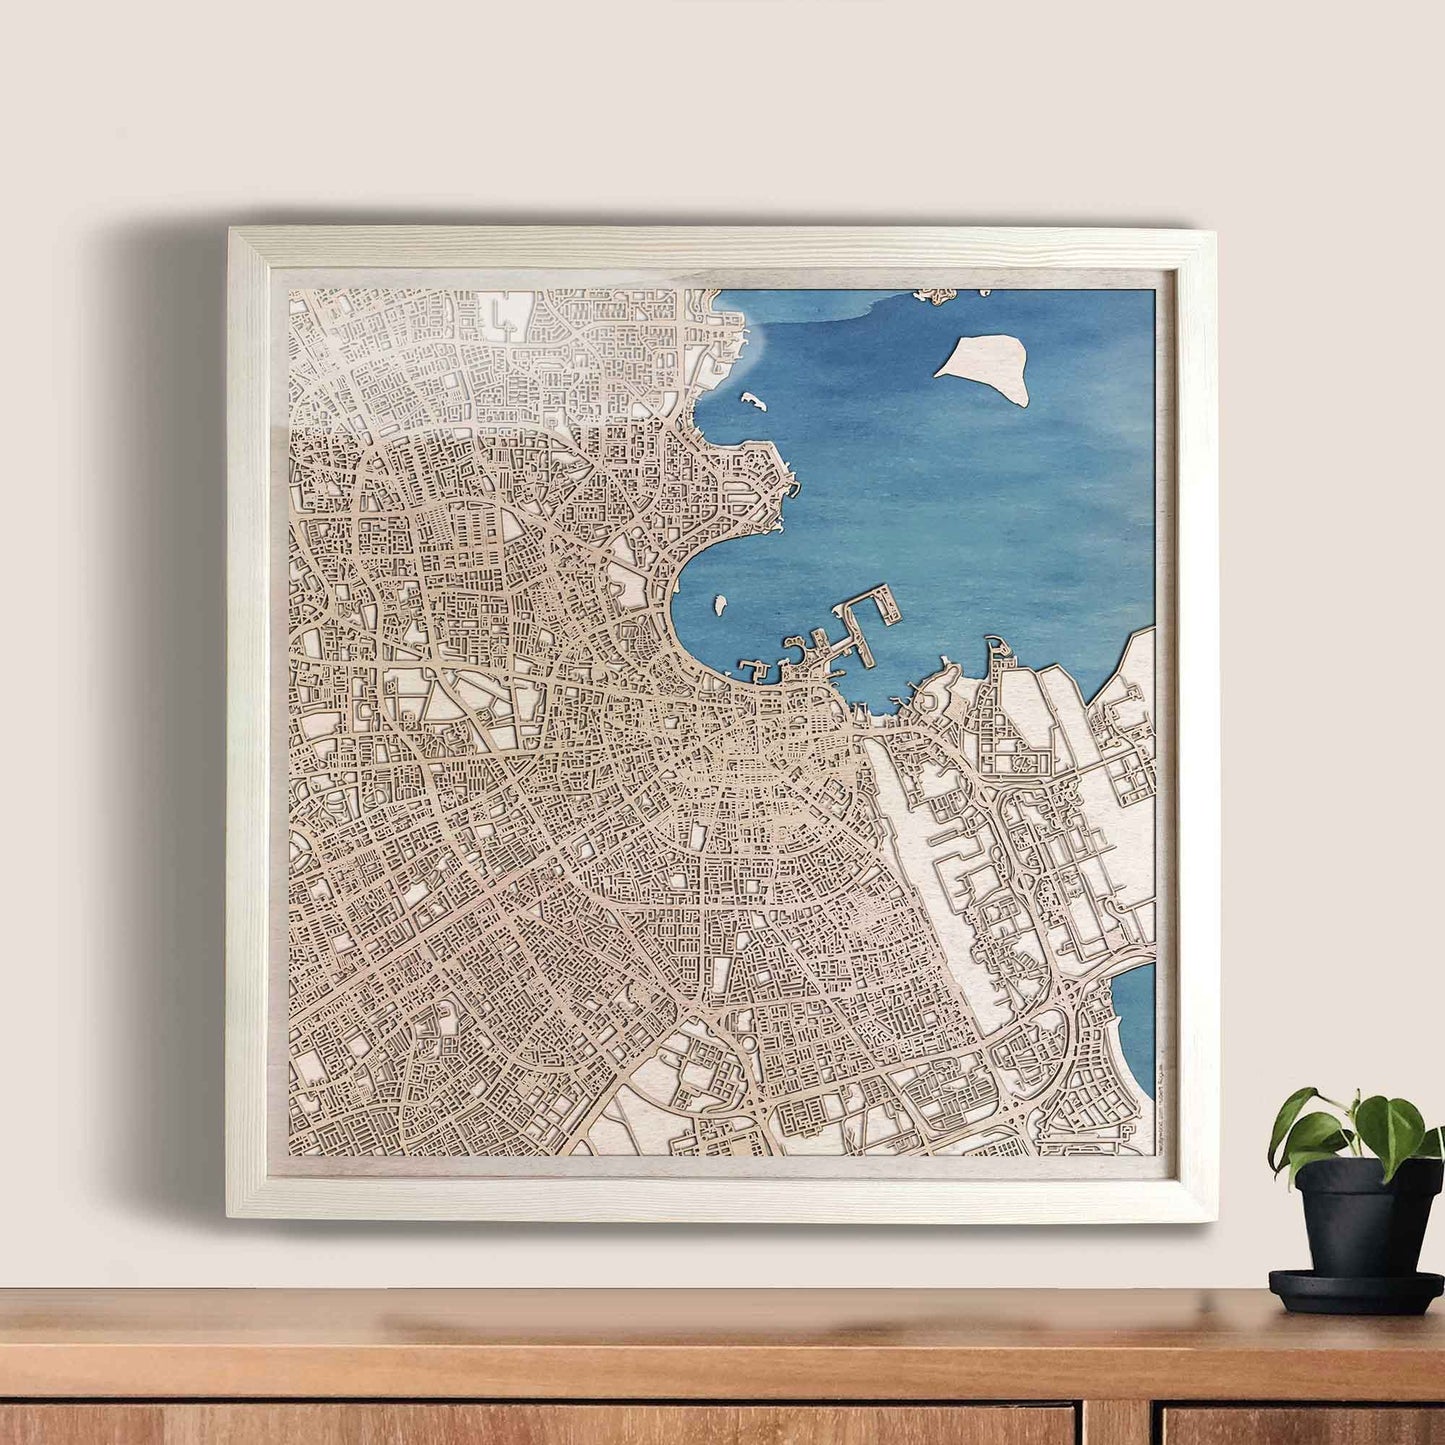 Doha Wooden Map by CityWood - Custom Wood Map Art - Unique Laser Cut Engraved - Anniversary Gift